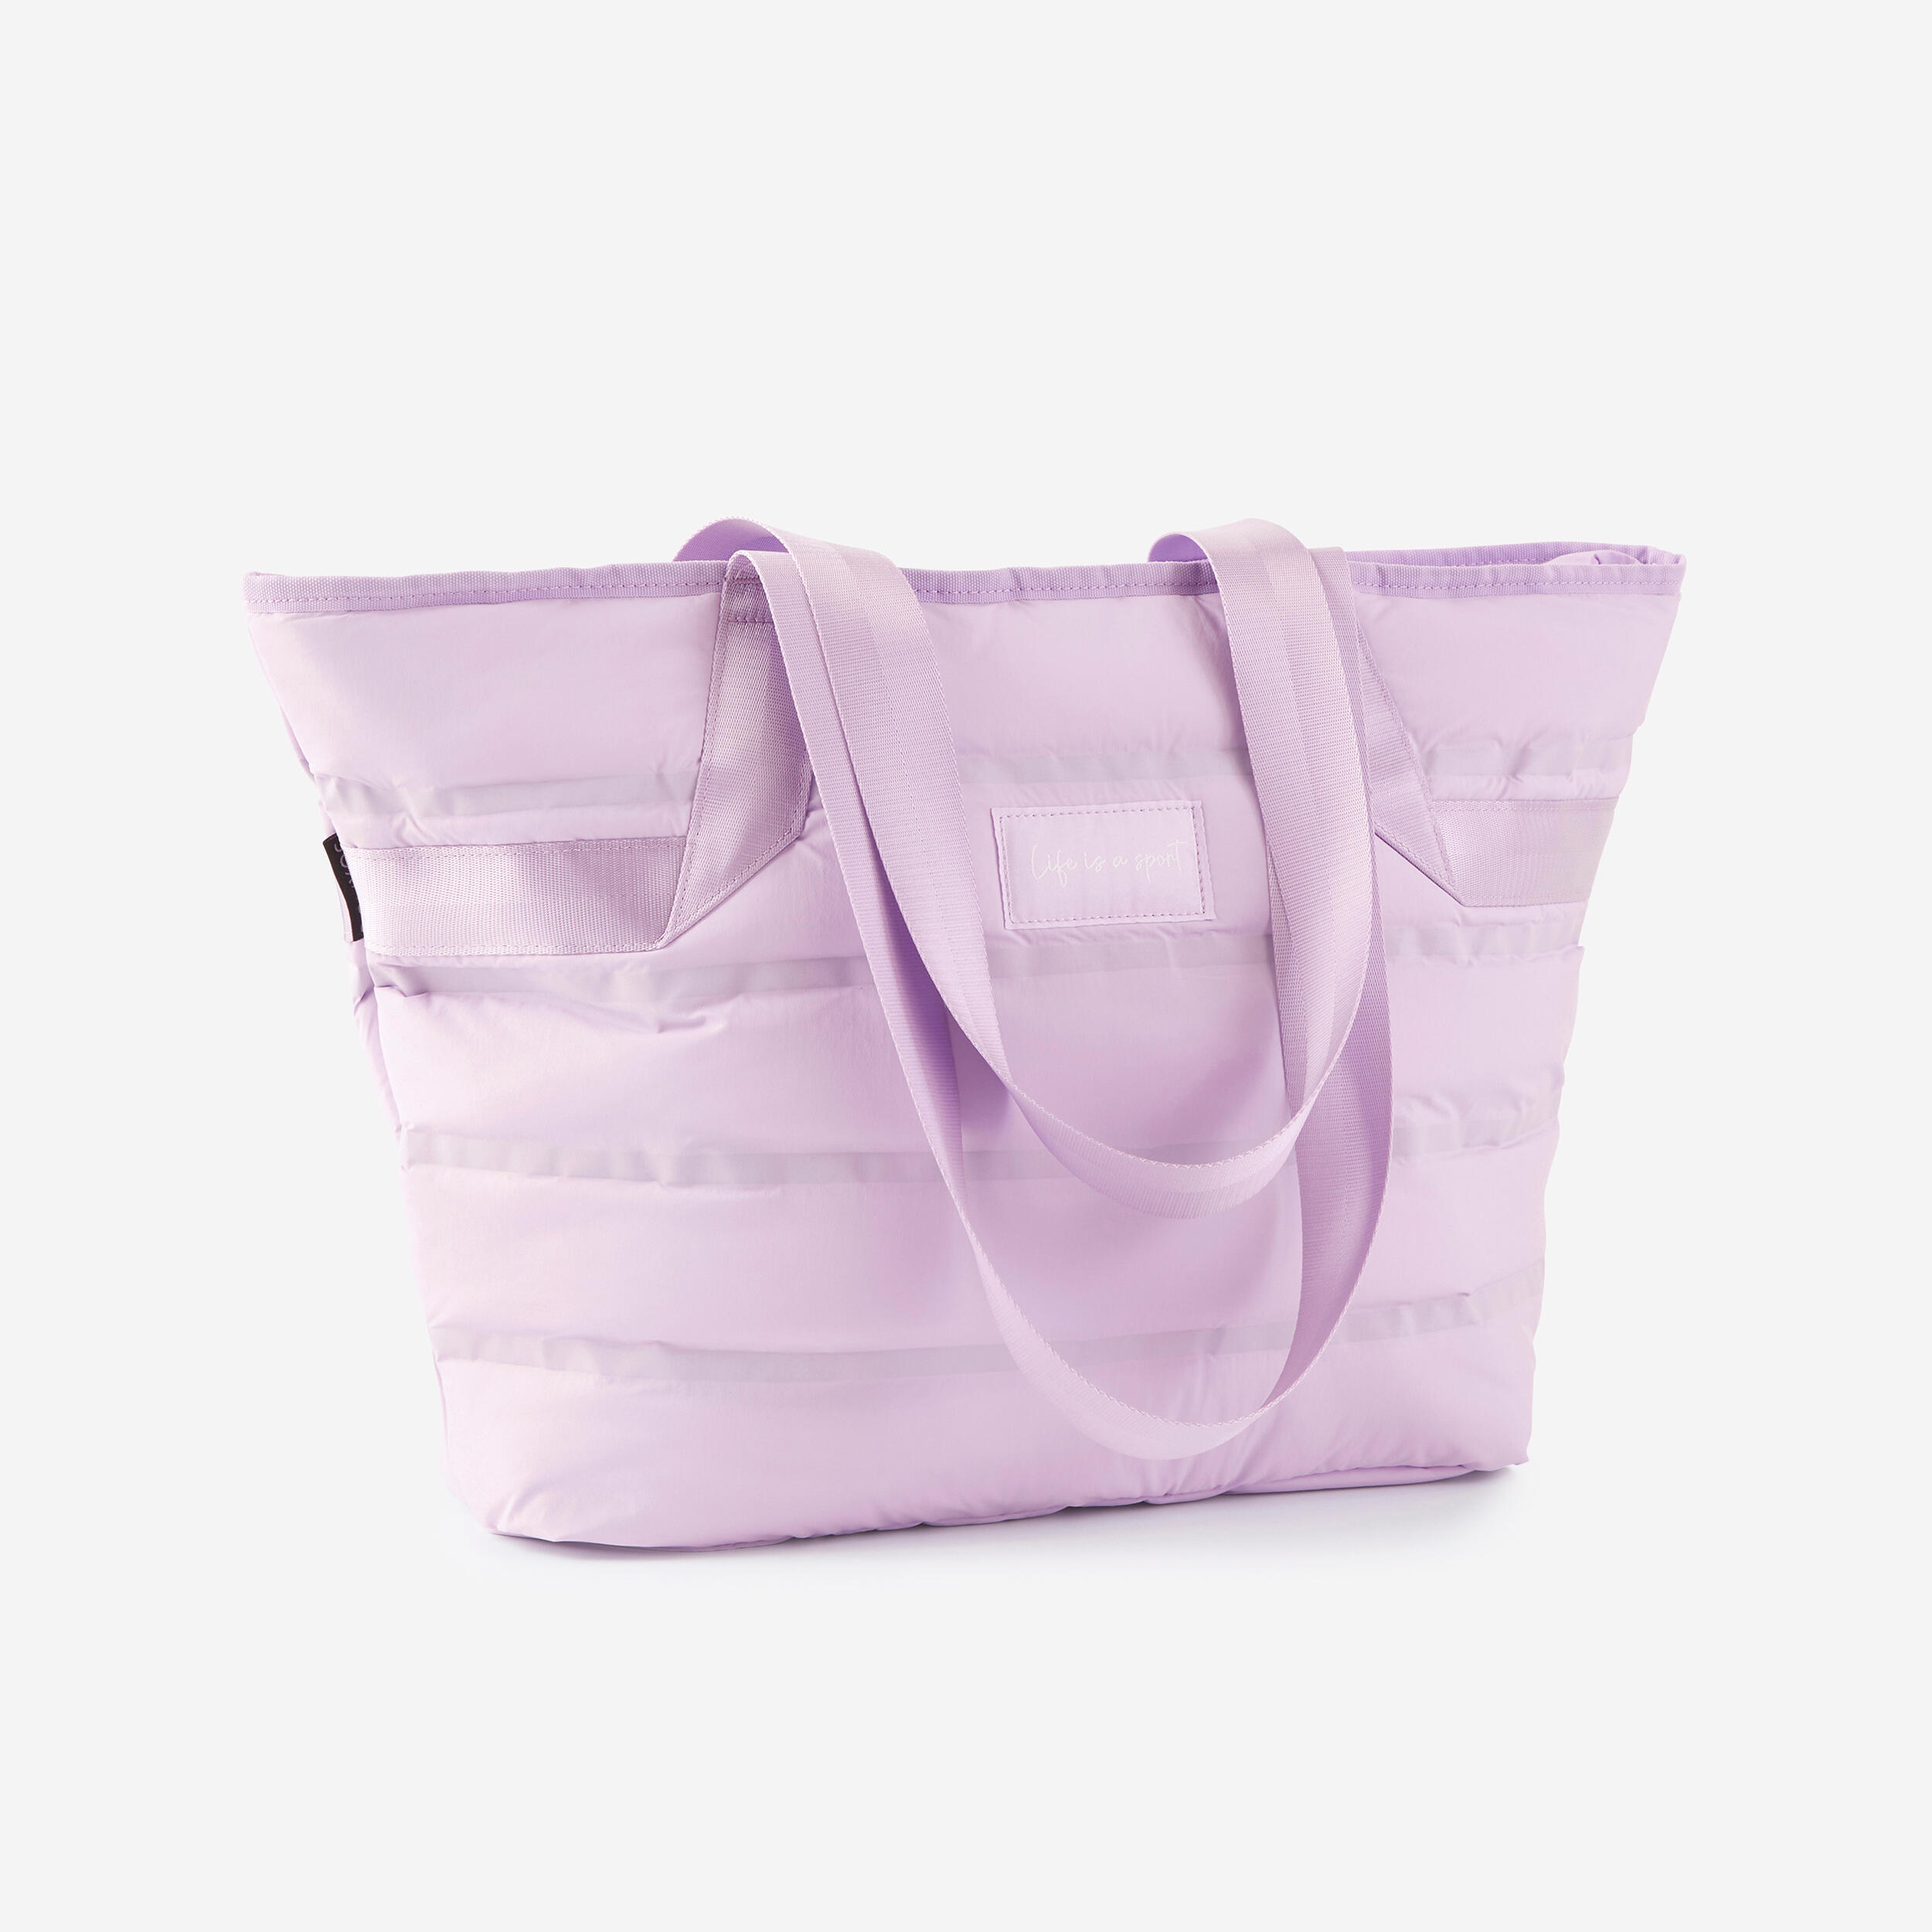 Women's 25 L Padded Fitness Training Tote Bag - Parma Violet 2/9